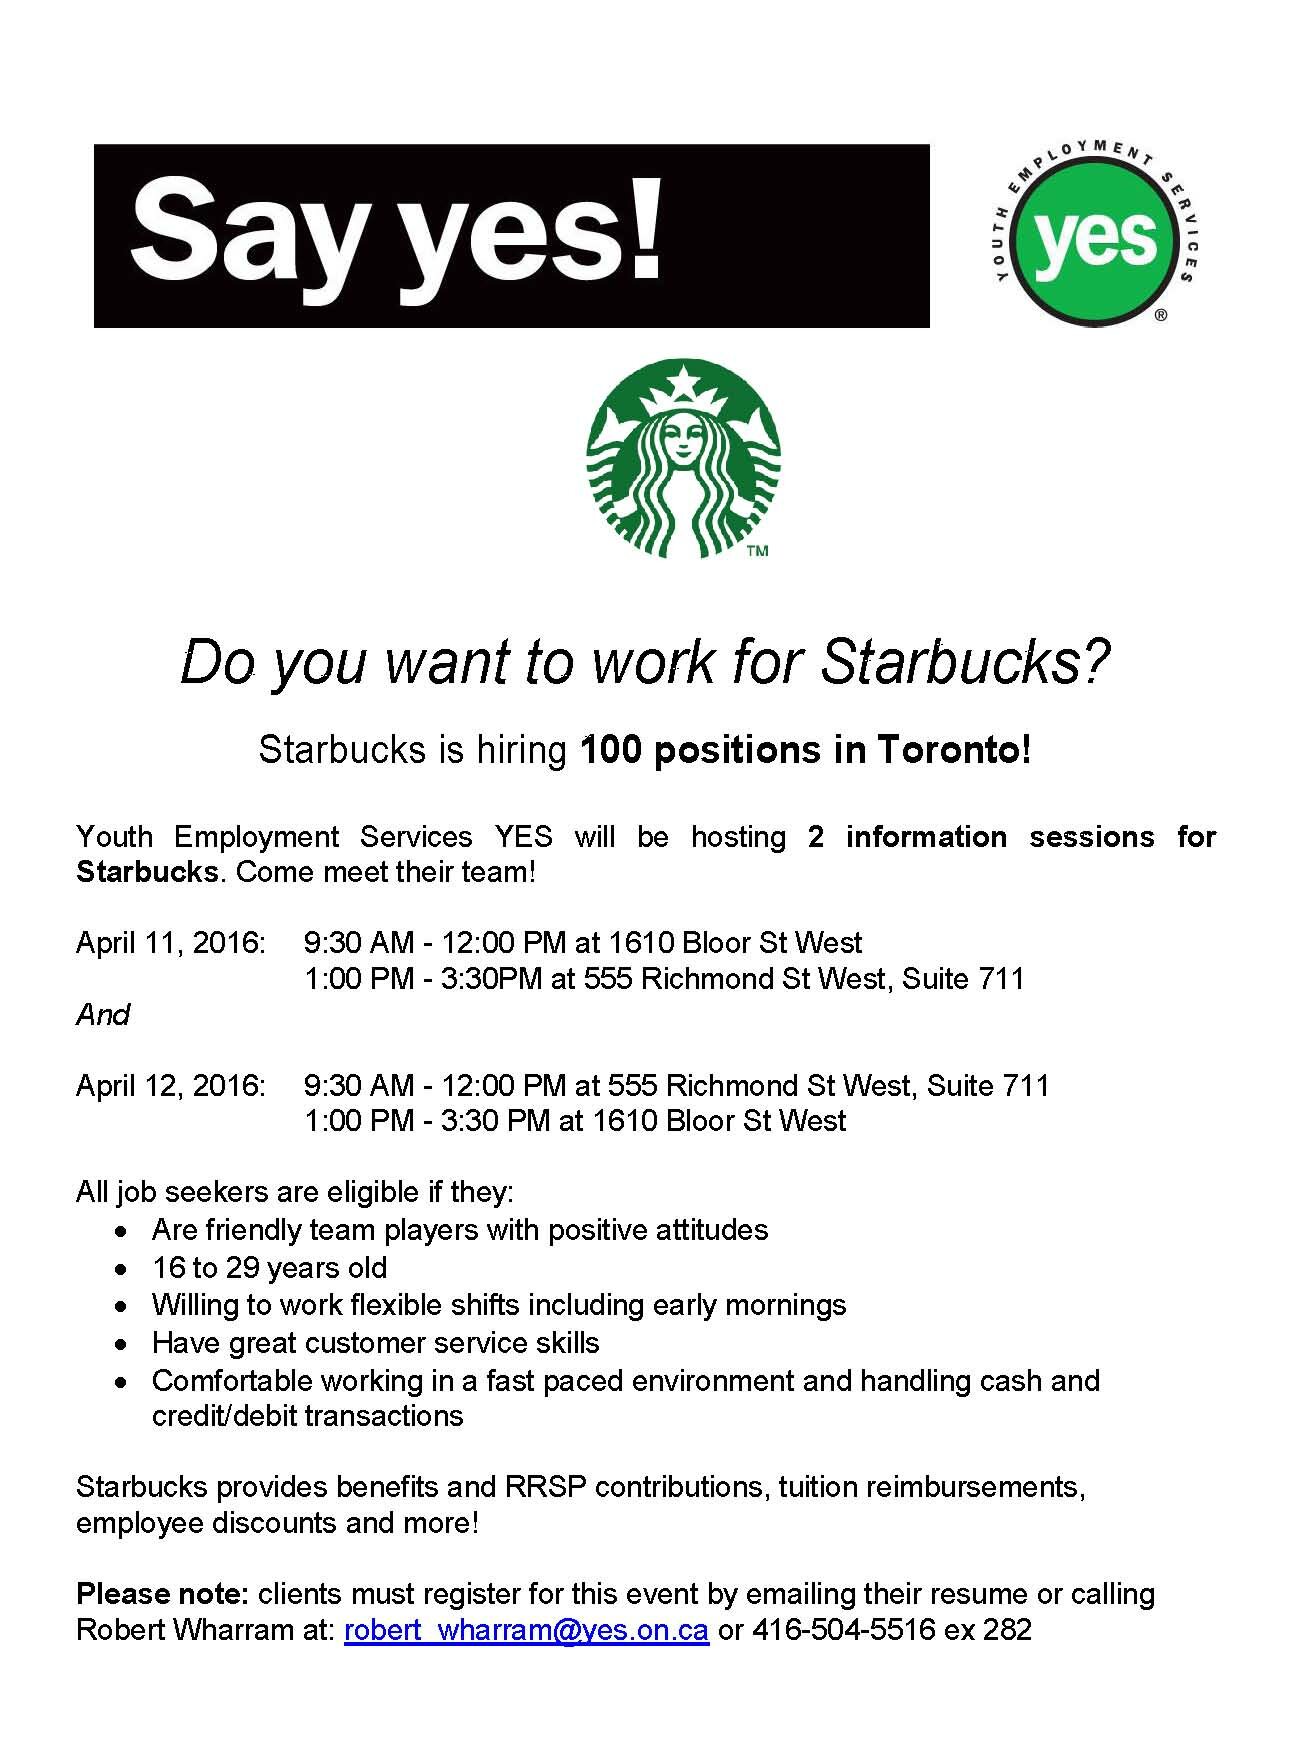 Starbucks is hiring for 100 Barista positions! Youth Employment